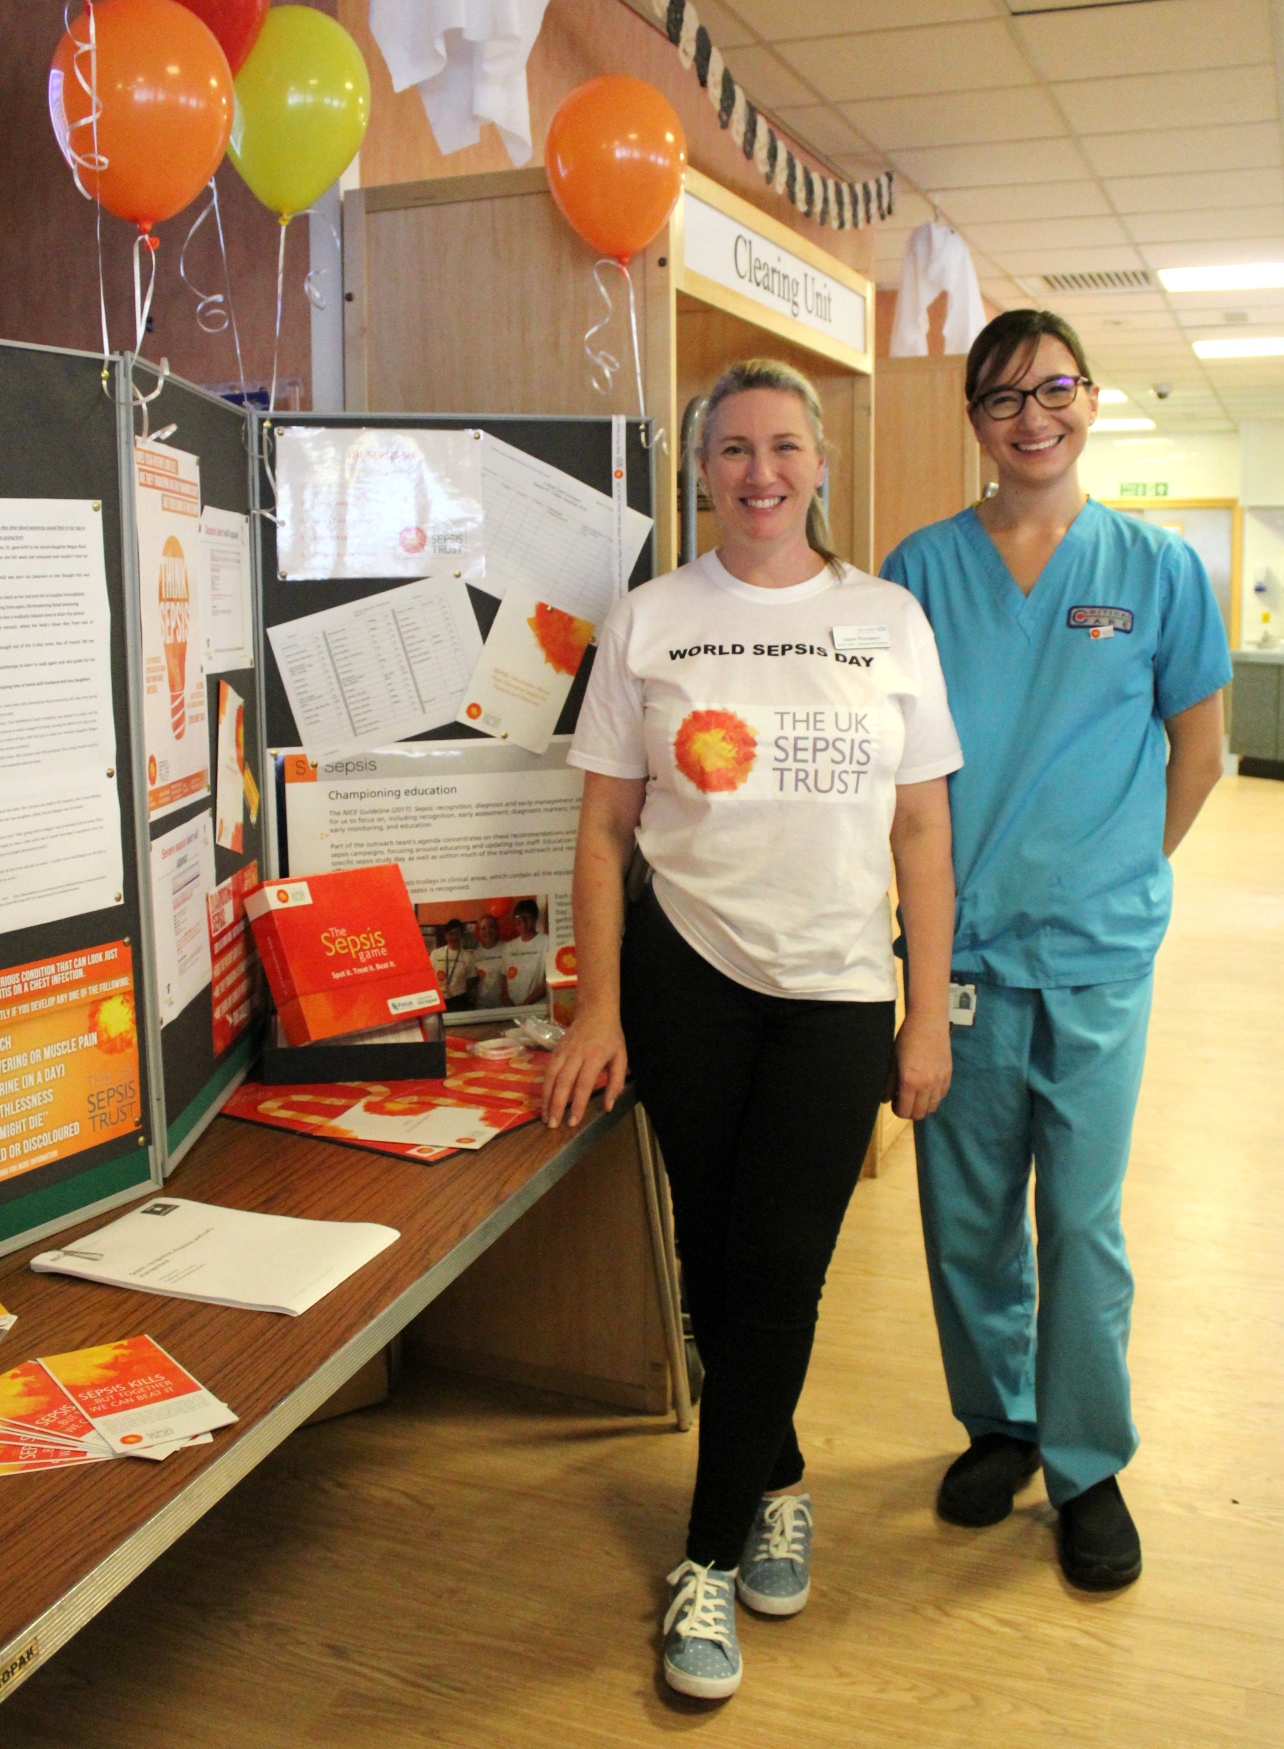  Laura and Vicky from the critical care outreach team raising awareness of sepsis for staff